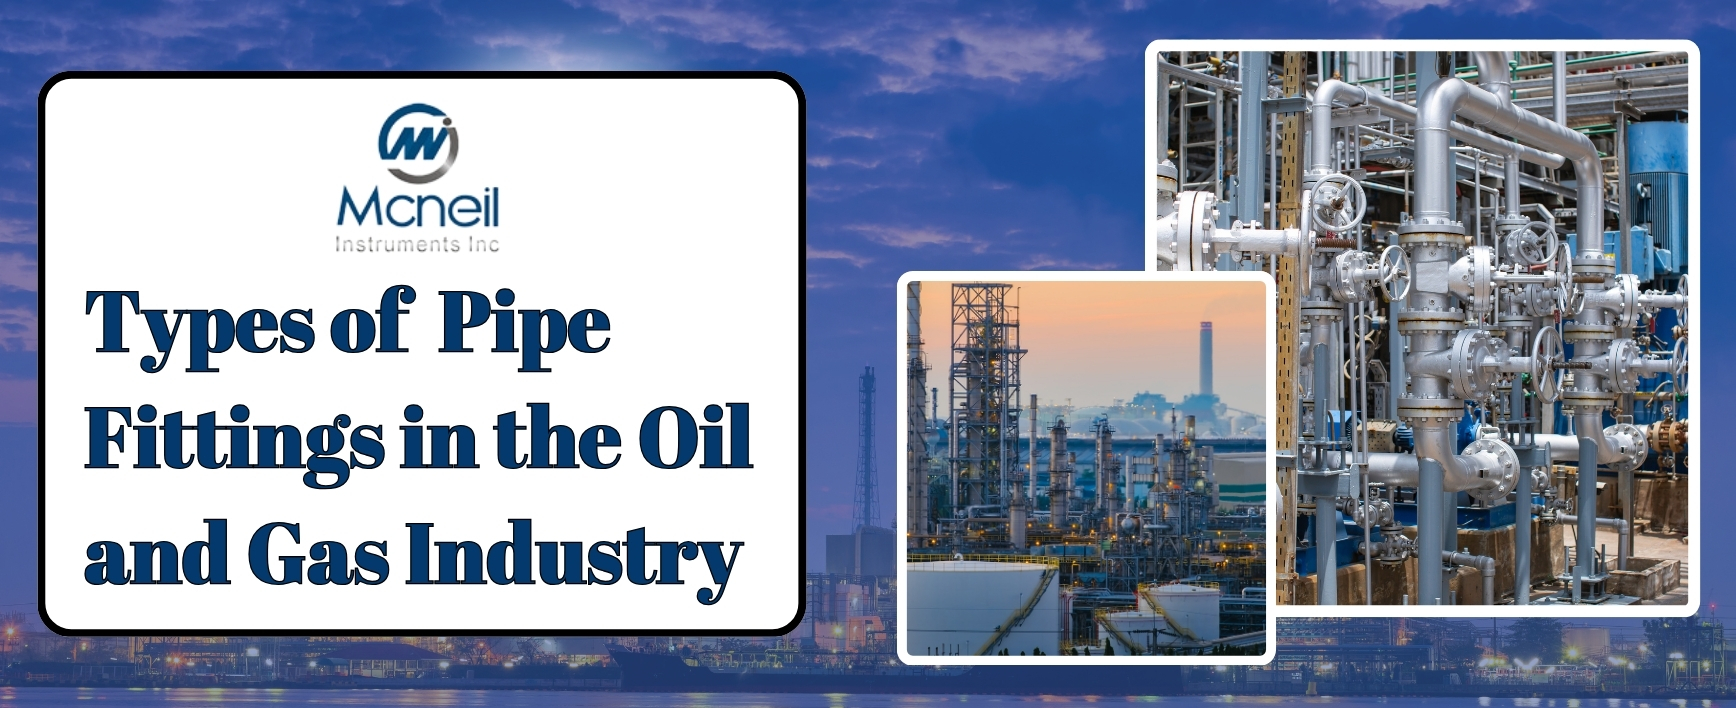 Types of Pipe Fittings in the Oil and Gas Industry